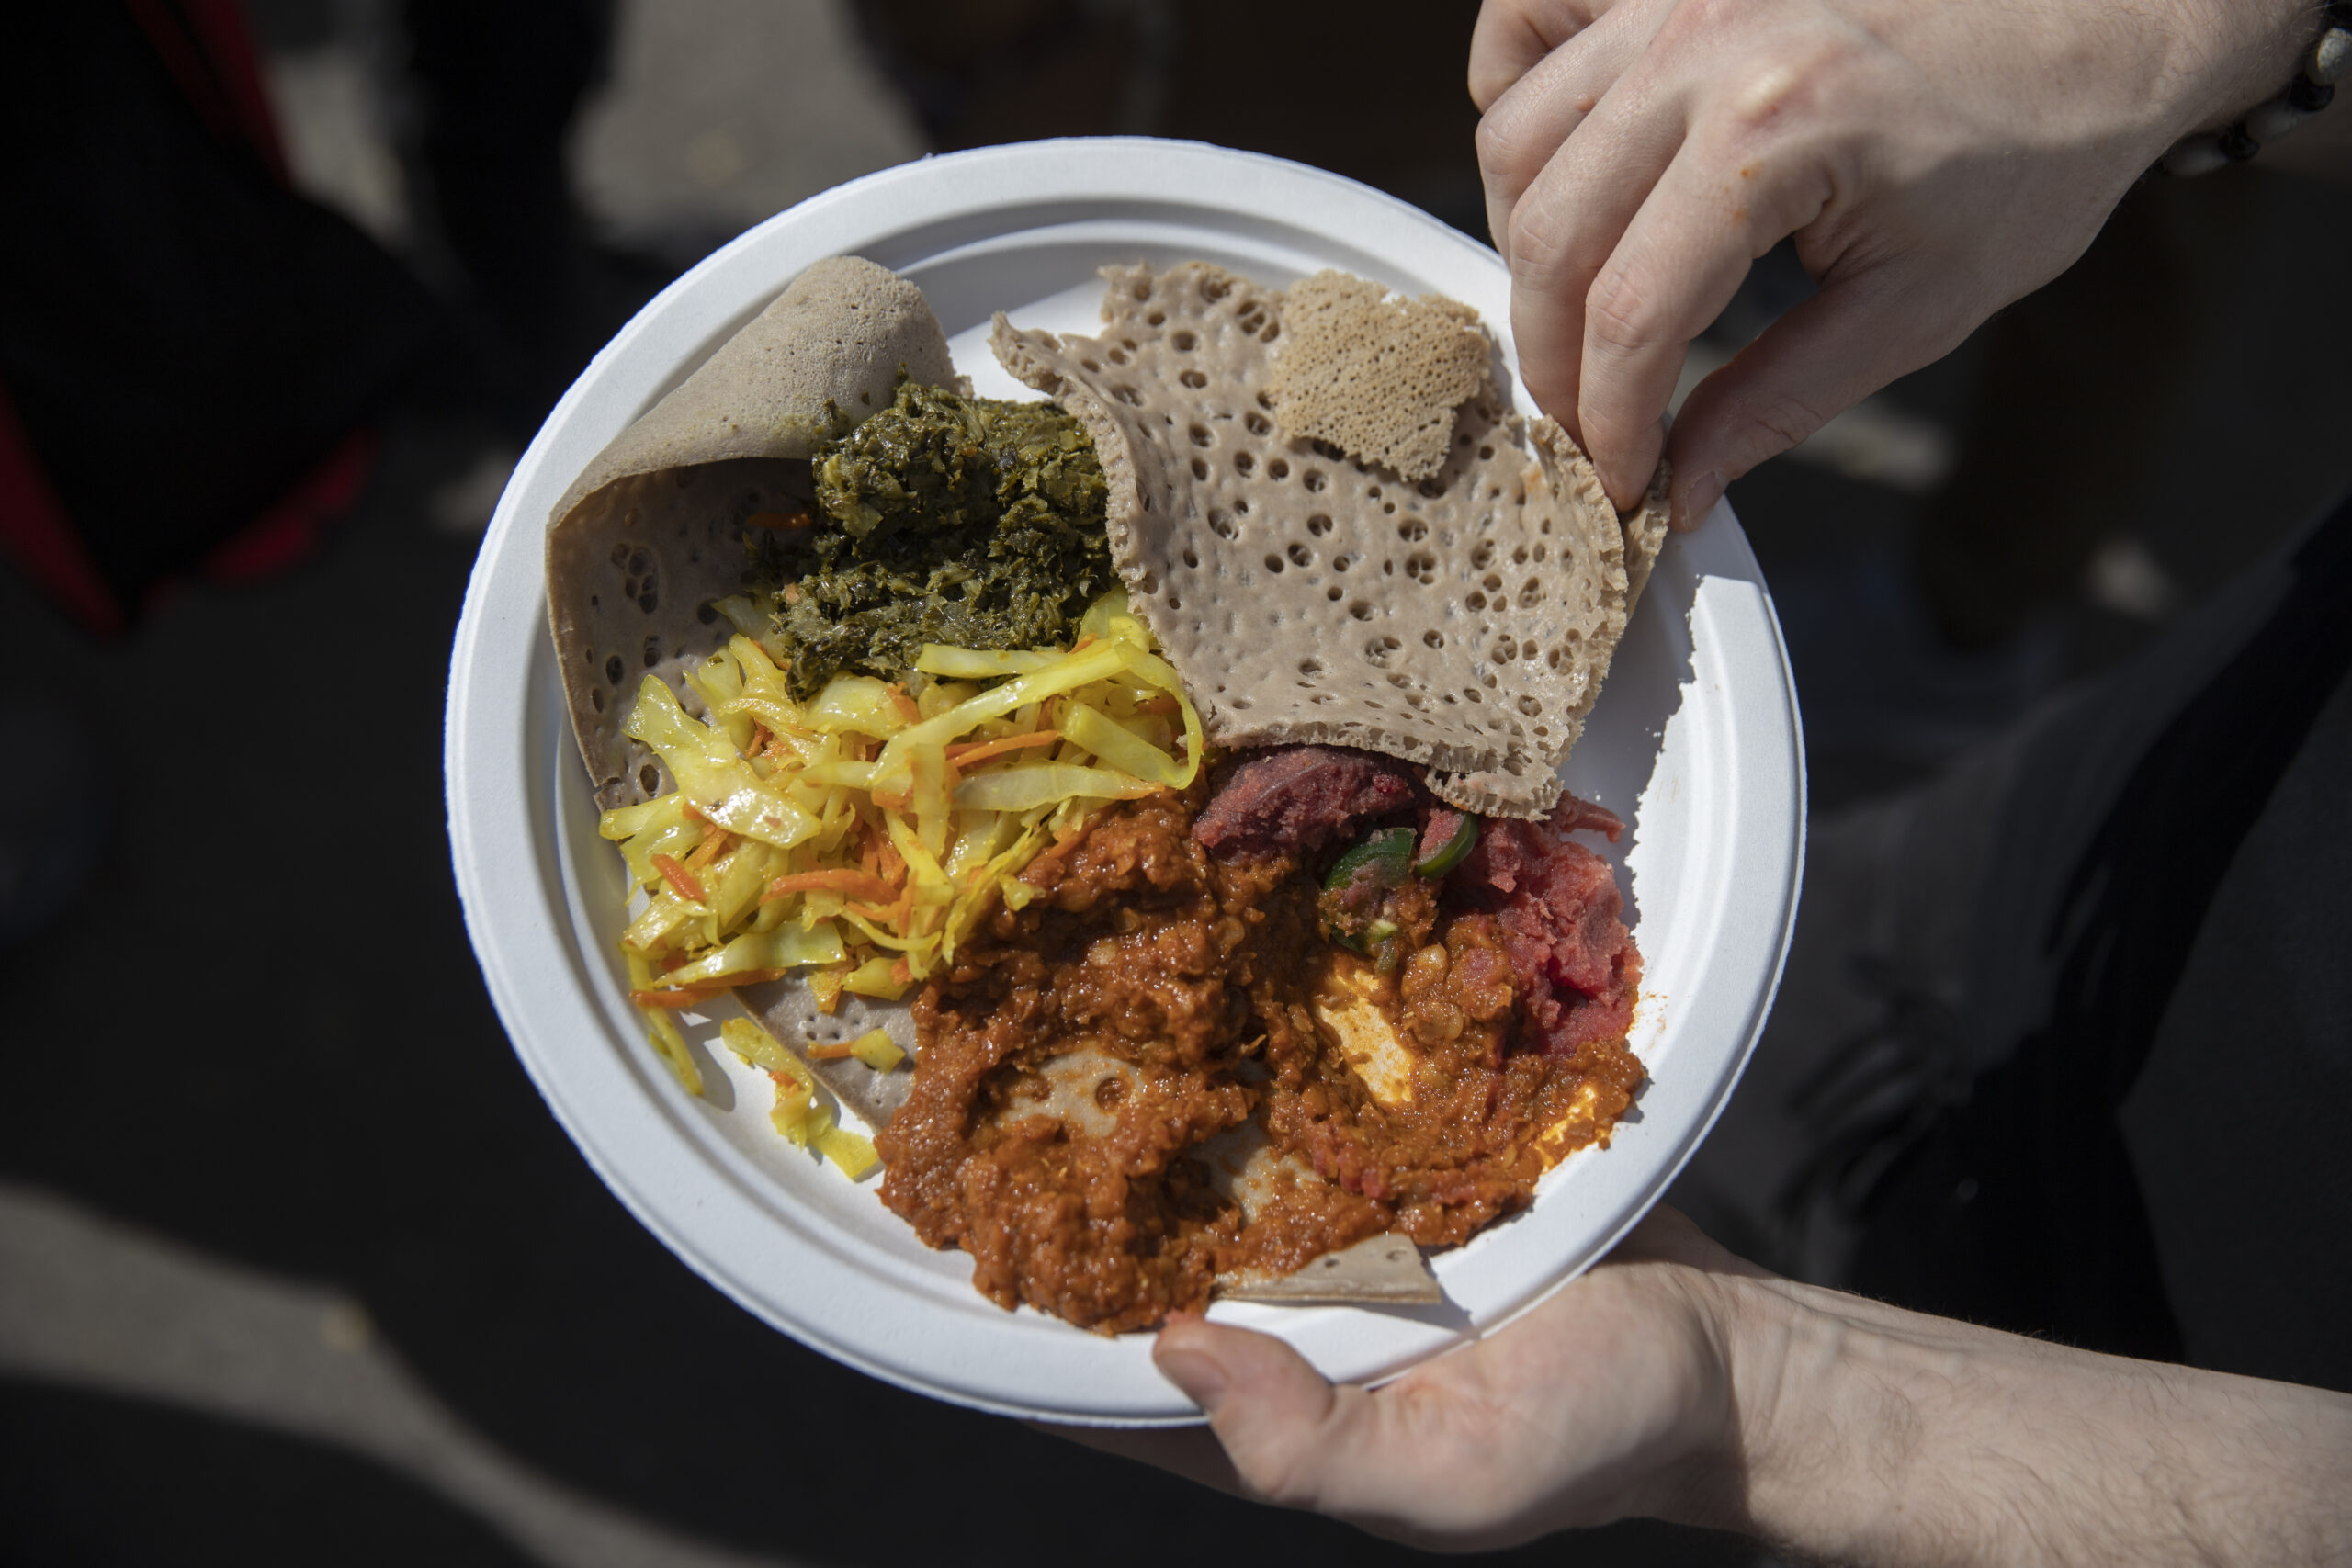 A plate of Ethiopian food from Emeye at Prospect Park Smorgasburg.